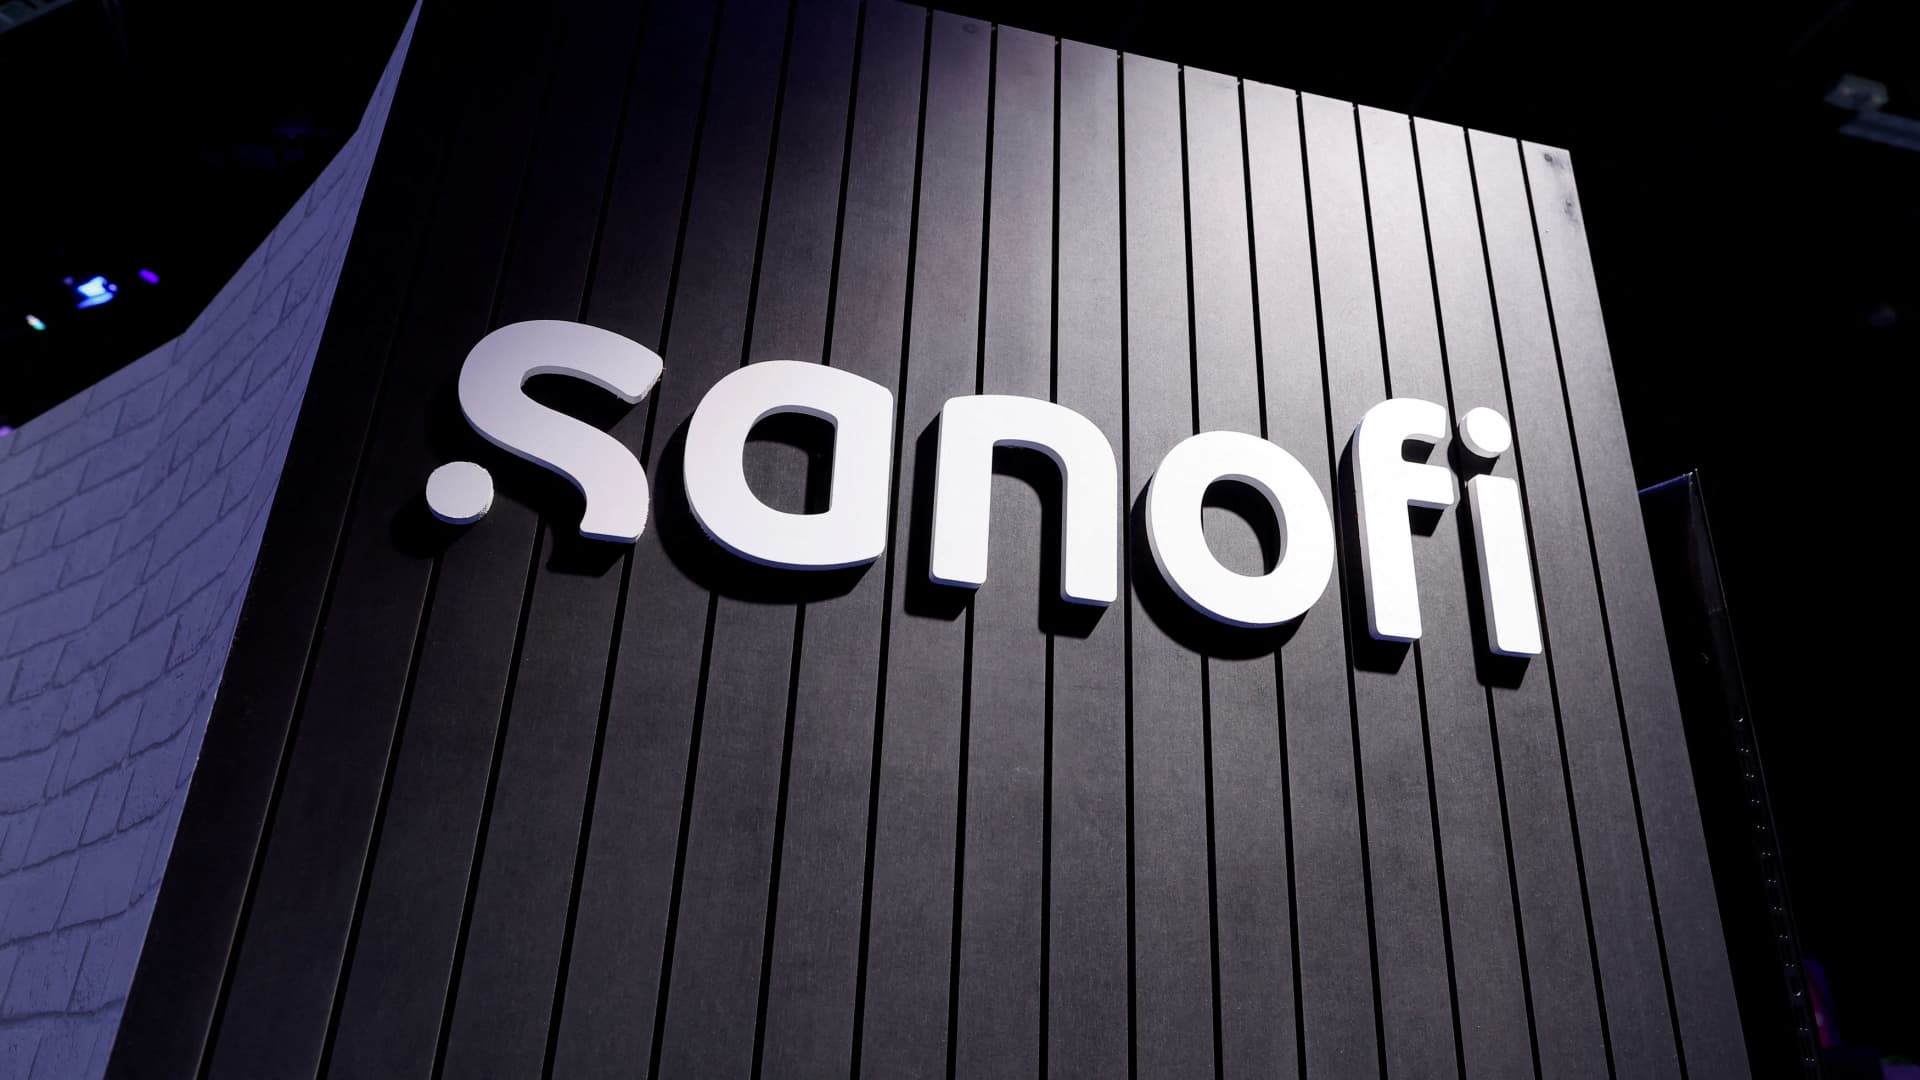 A logo on the Sanofi exhibition space at the Viva Technology conference dedicated to innovation and startups at Porte de Versailles exhibition center in Paris, France June 15, 2022.